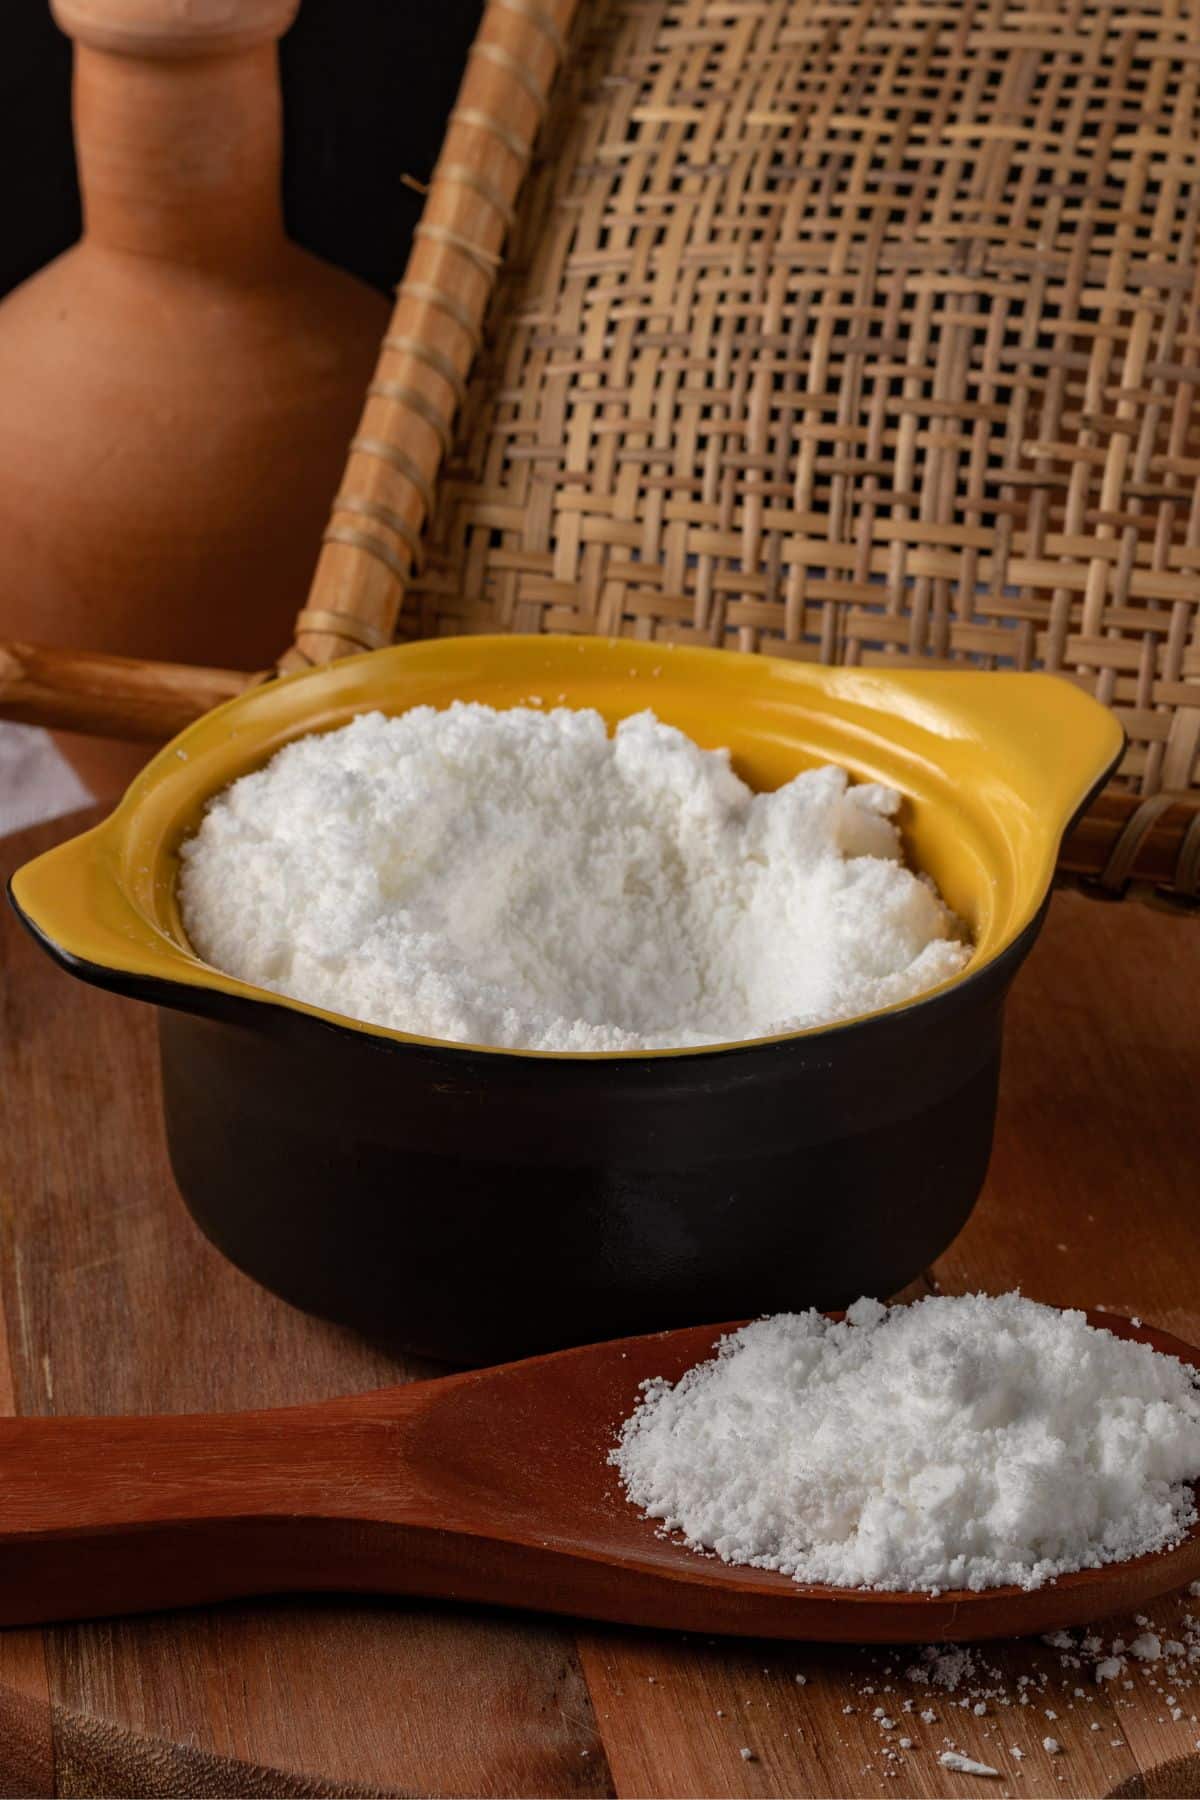 Bowl and spoonful of tapioca flour on wooden surface.